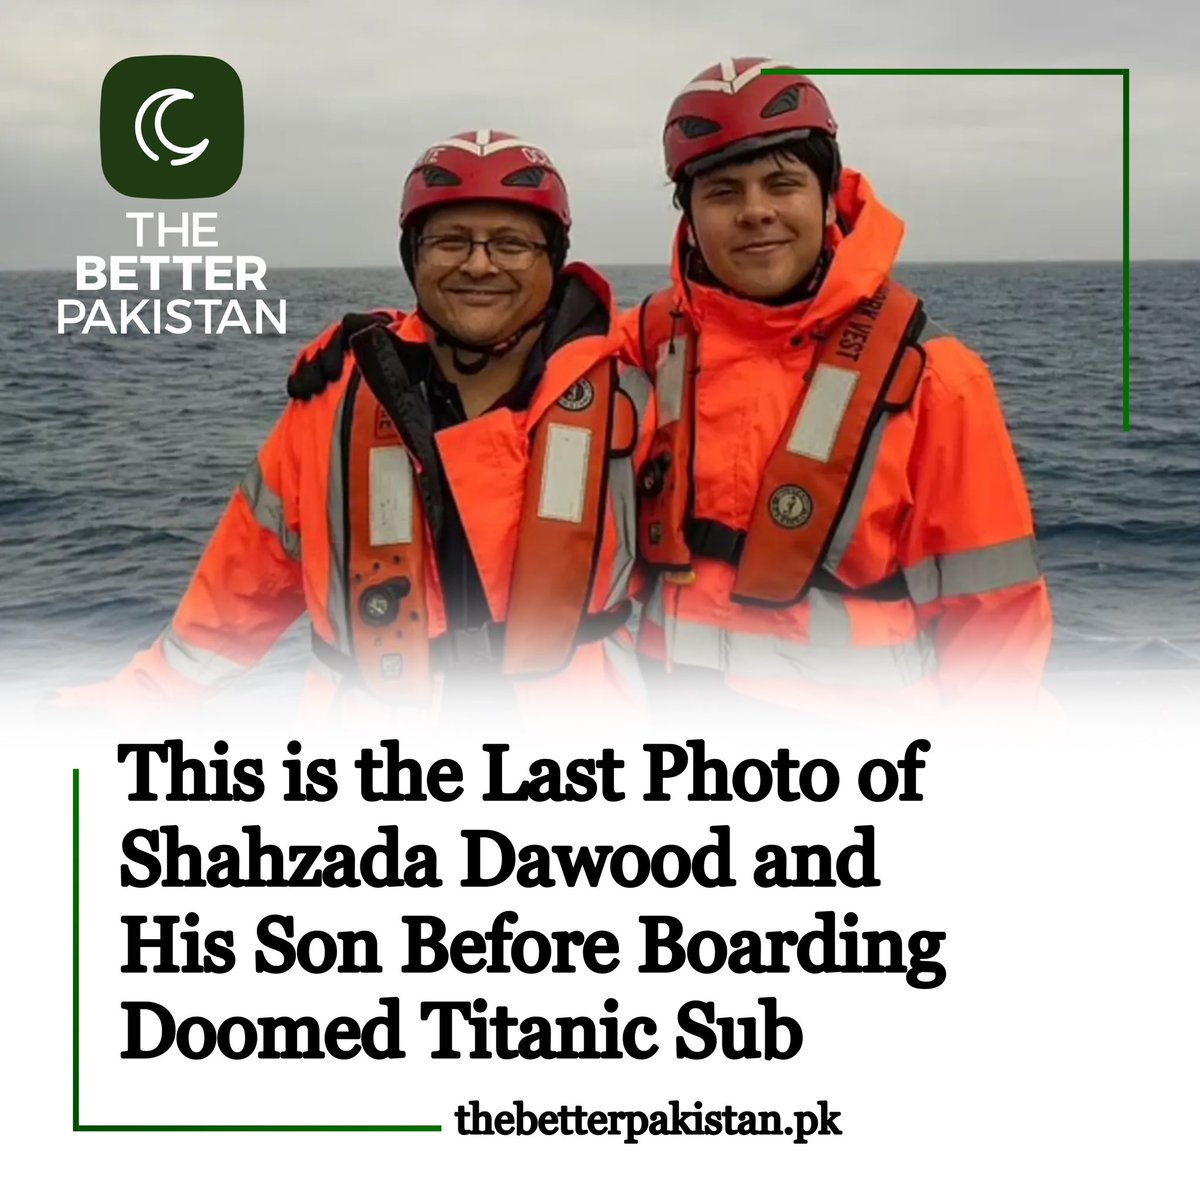 A heartbreaking final photo shows Pakistani British billionaire Shahzada Dawood and his 19-year-old son, Sulaiman, smiling happily just before getting on the doomed Titan submersible. 

.#TITAN #TitanicRescue #shahzadadawood